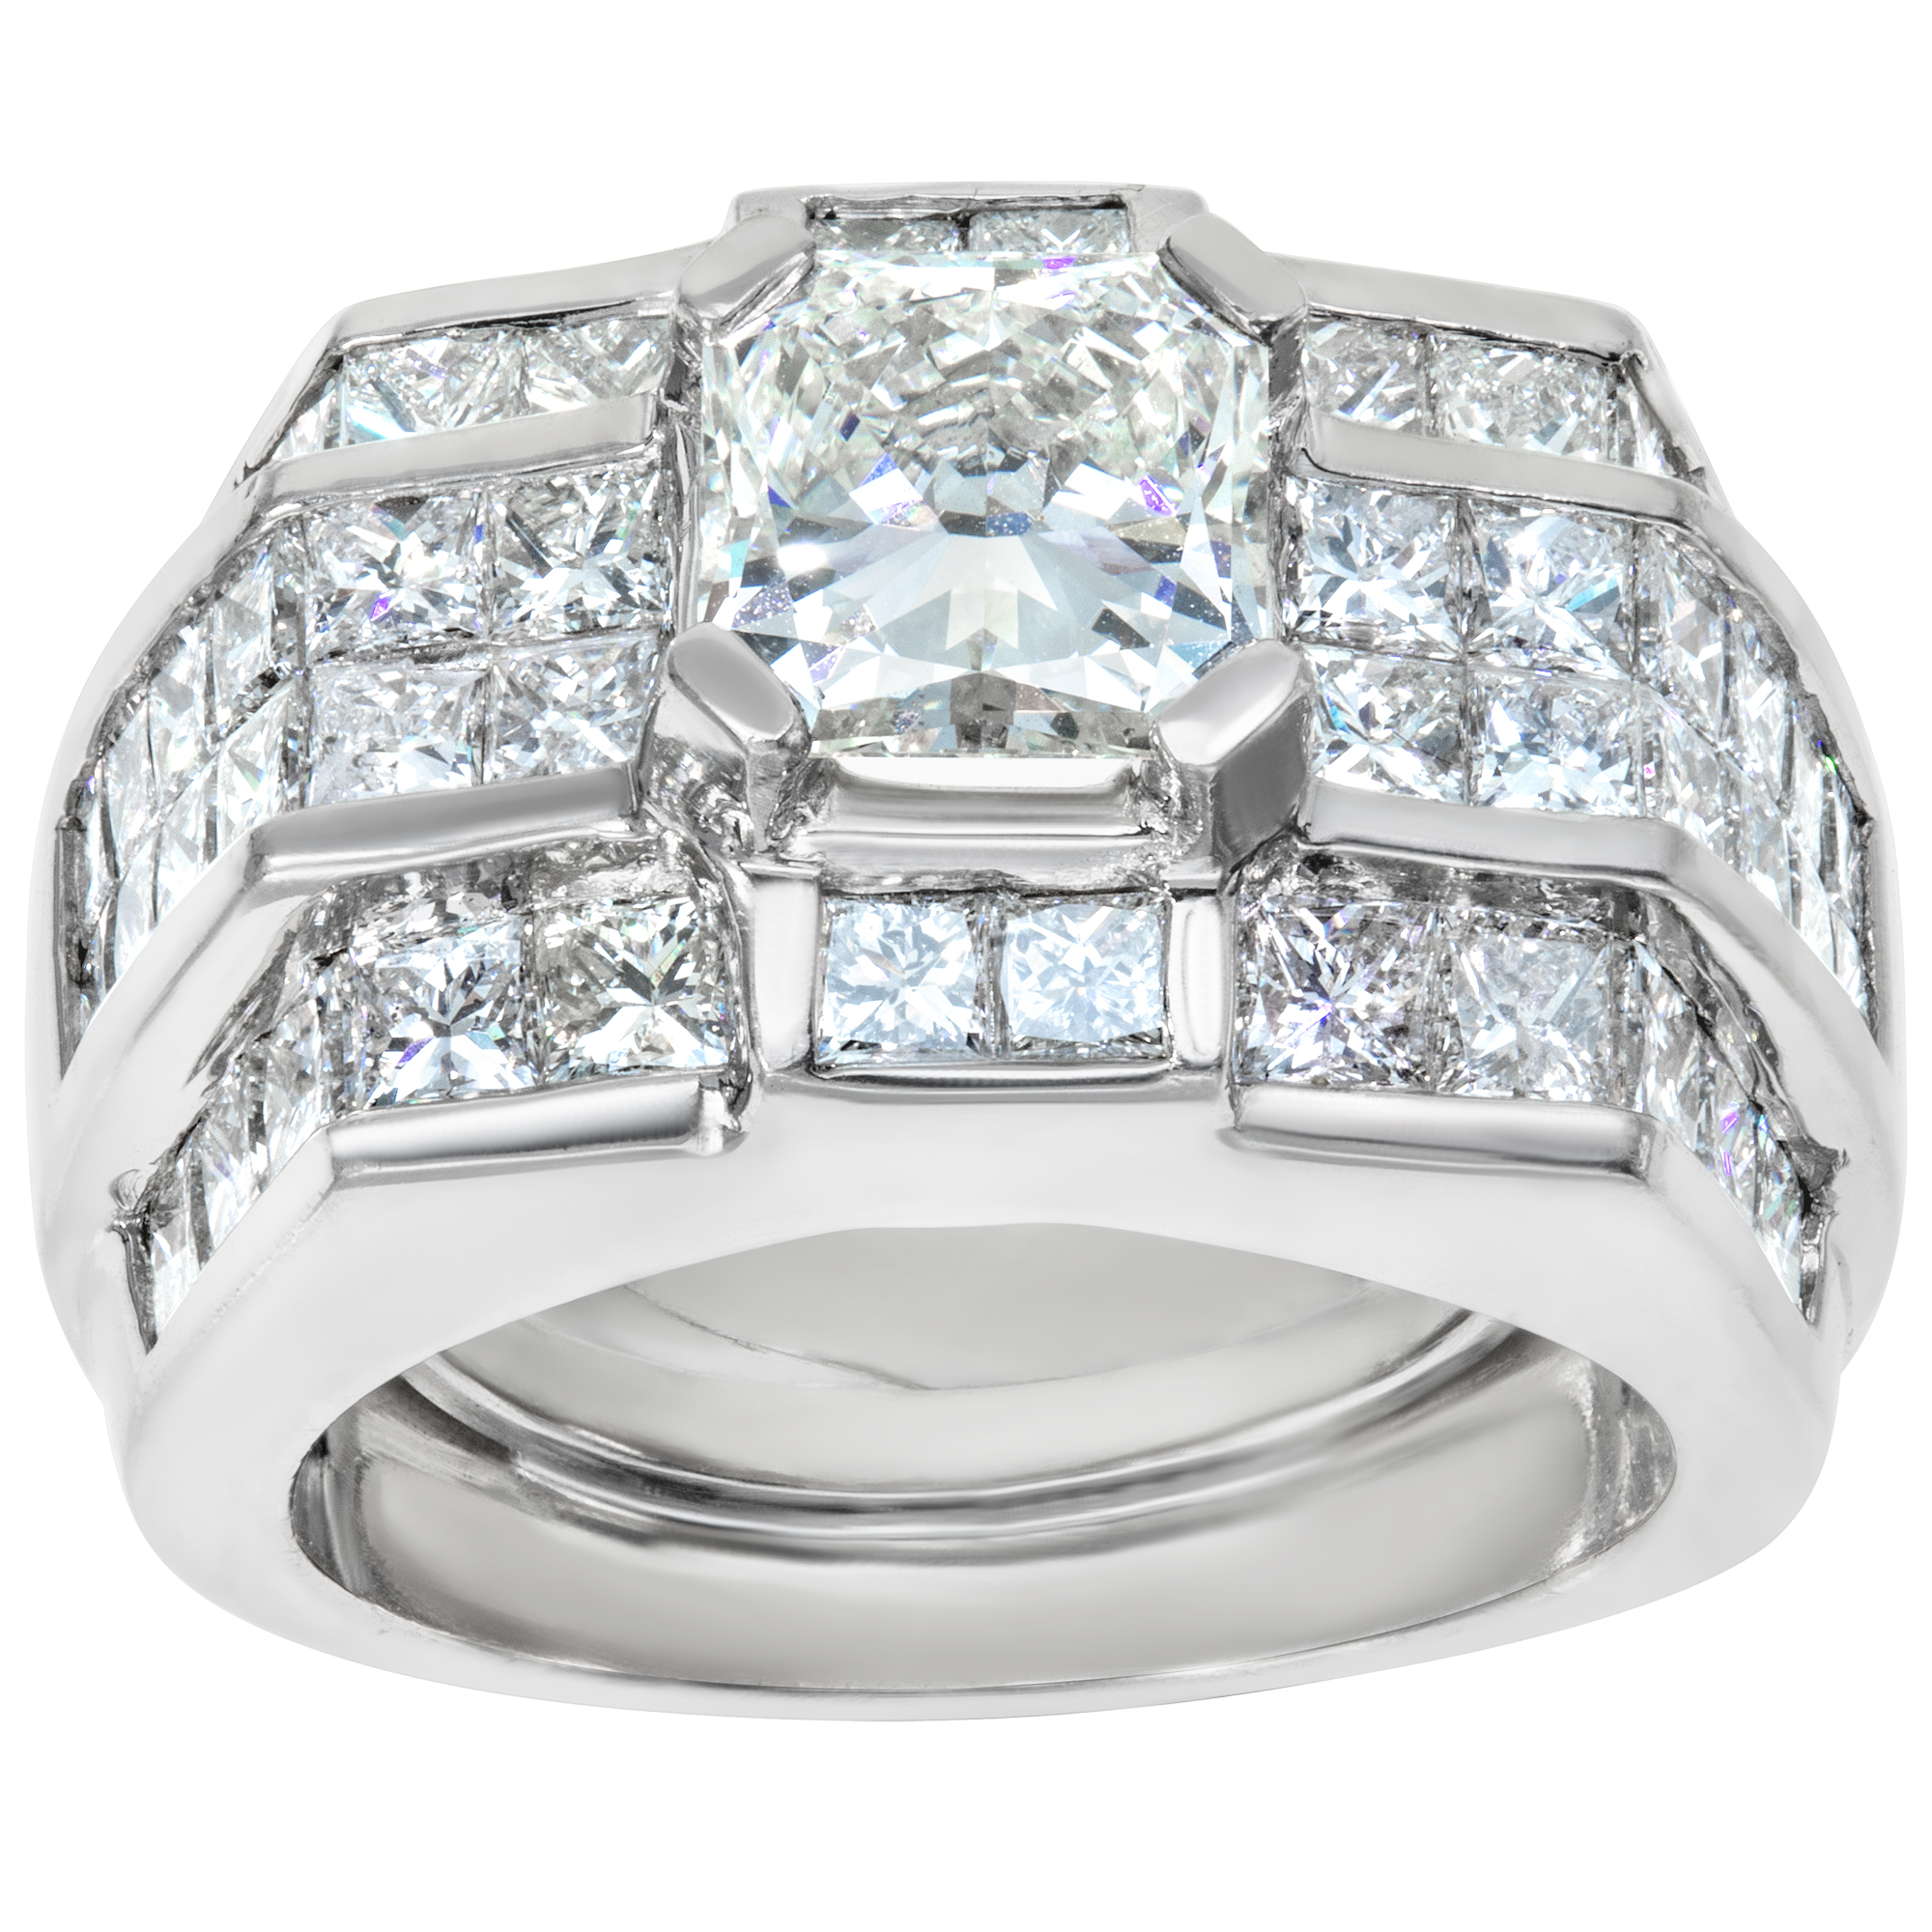 Gia Certified 2.22 Carats Round  Brilliant Diamond,  J Color Vs2 Clarity Set In Heavy Platinum Ring With 4 Rows Invisible Set  Princess Cut Diamonds, Total  Approx. Weight: 4.60 Carats image 1